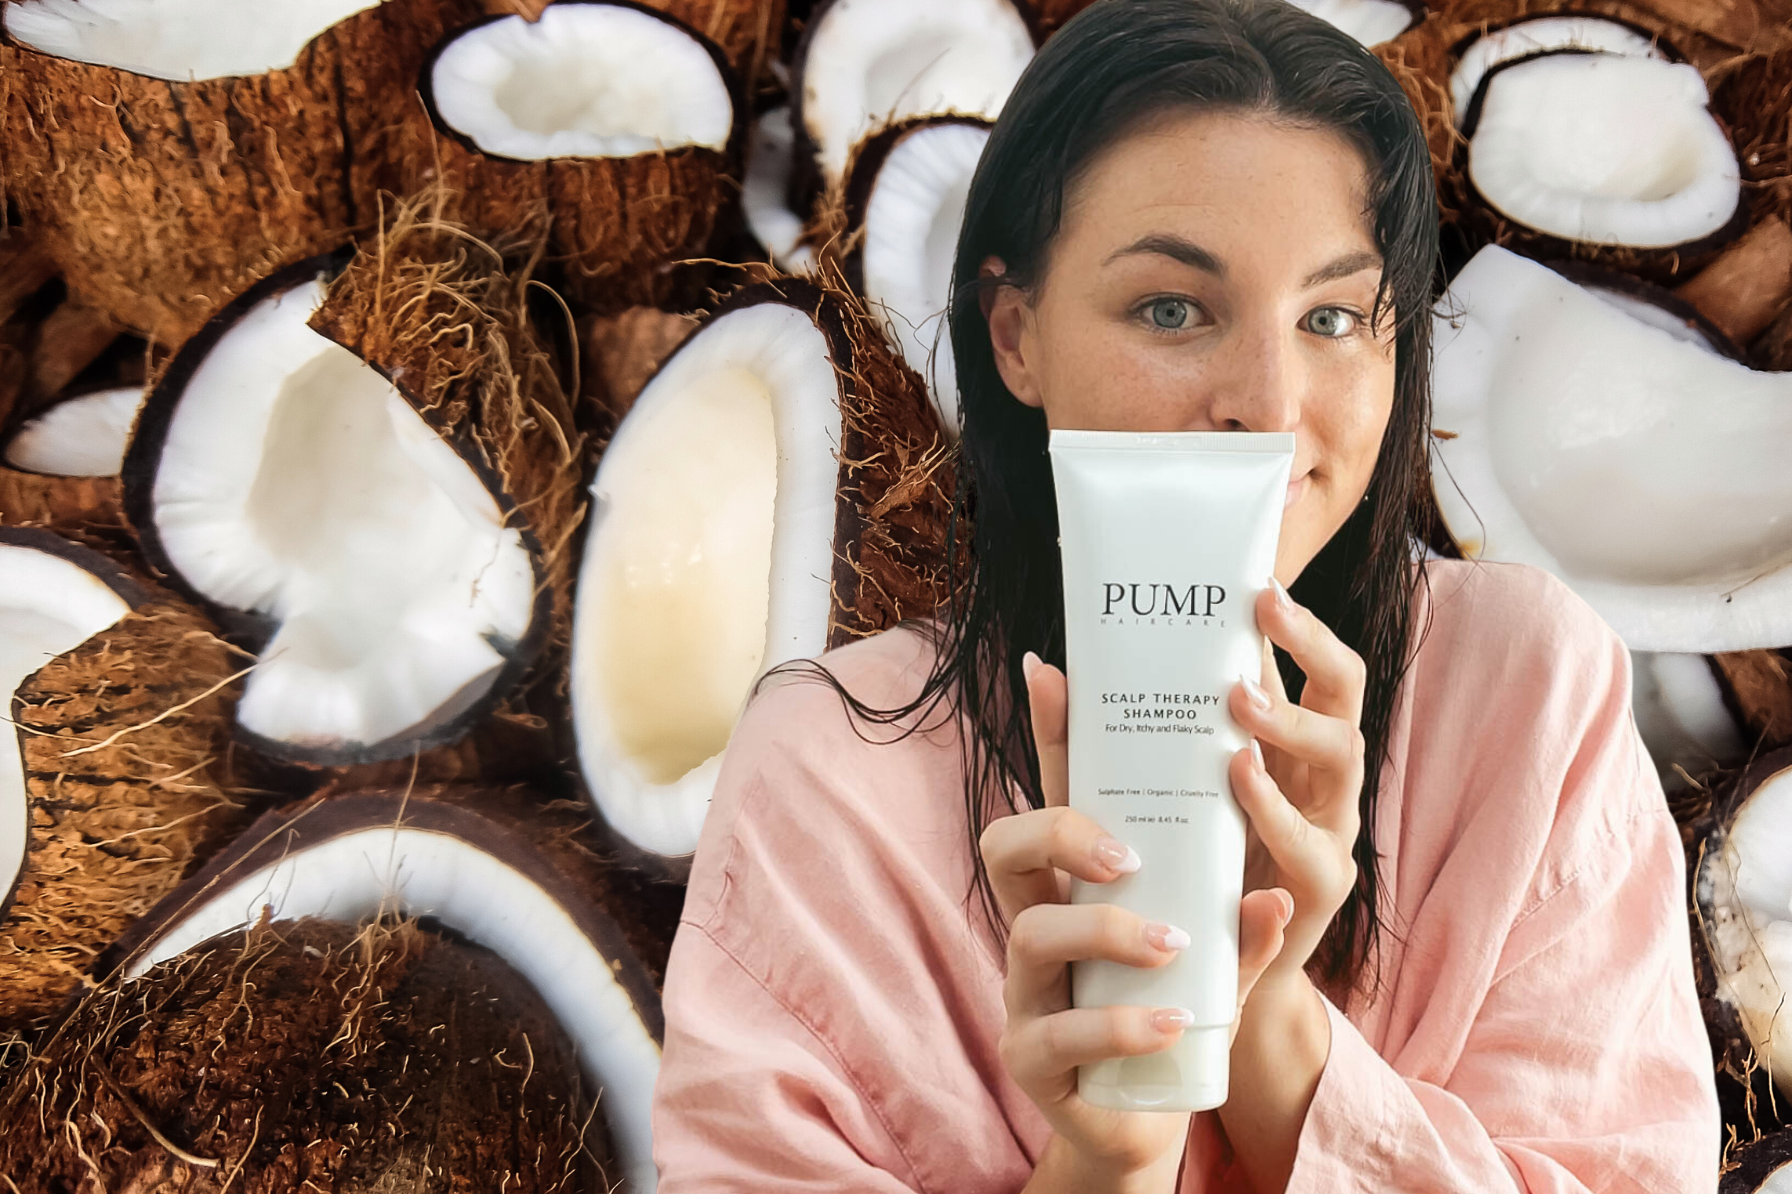 COCONUT DRY BRUSH MASSAGE: WHAT YOU NEED RIGHT NOW